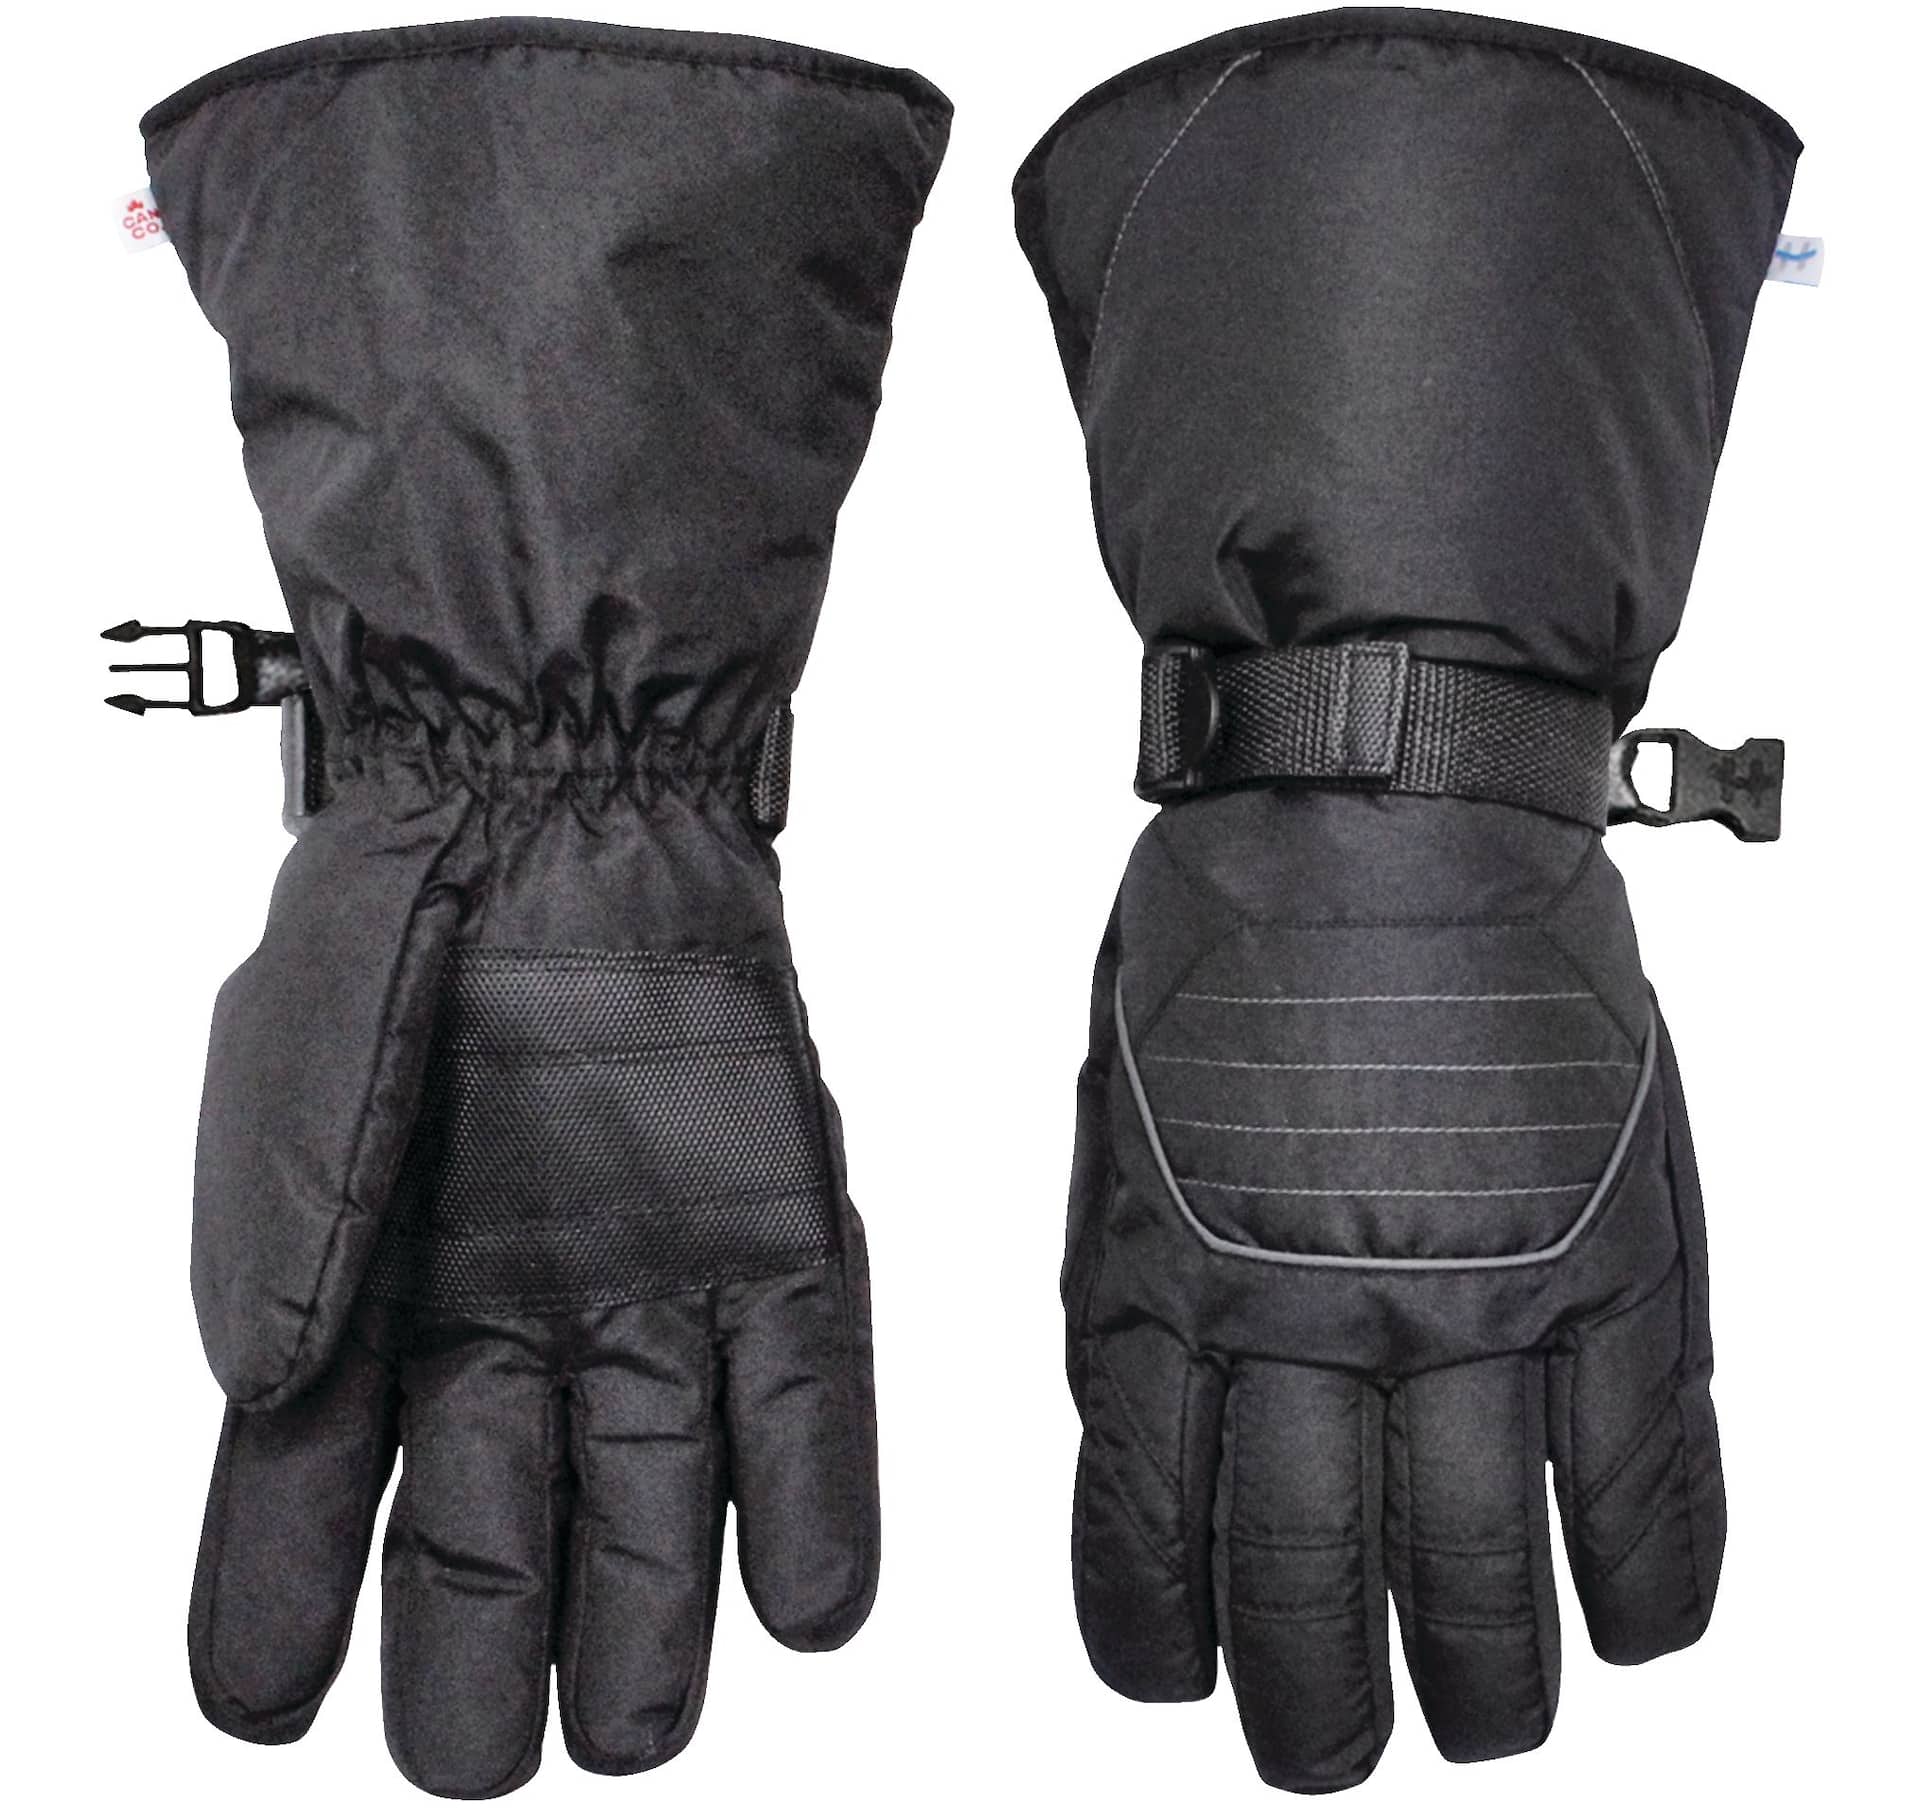 Hot Paws Men's Thermal Insulated Winter Ski Snowboard Gloves Cold Weather  Waterproof